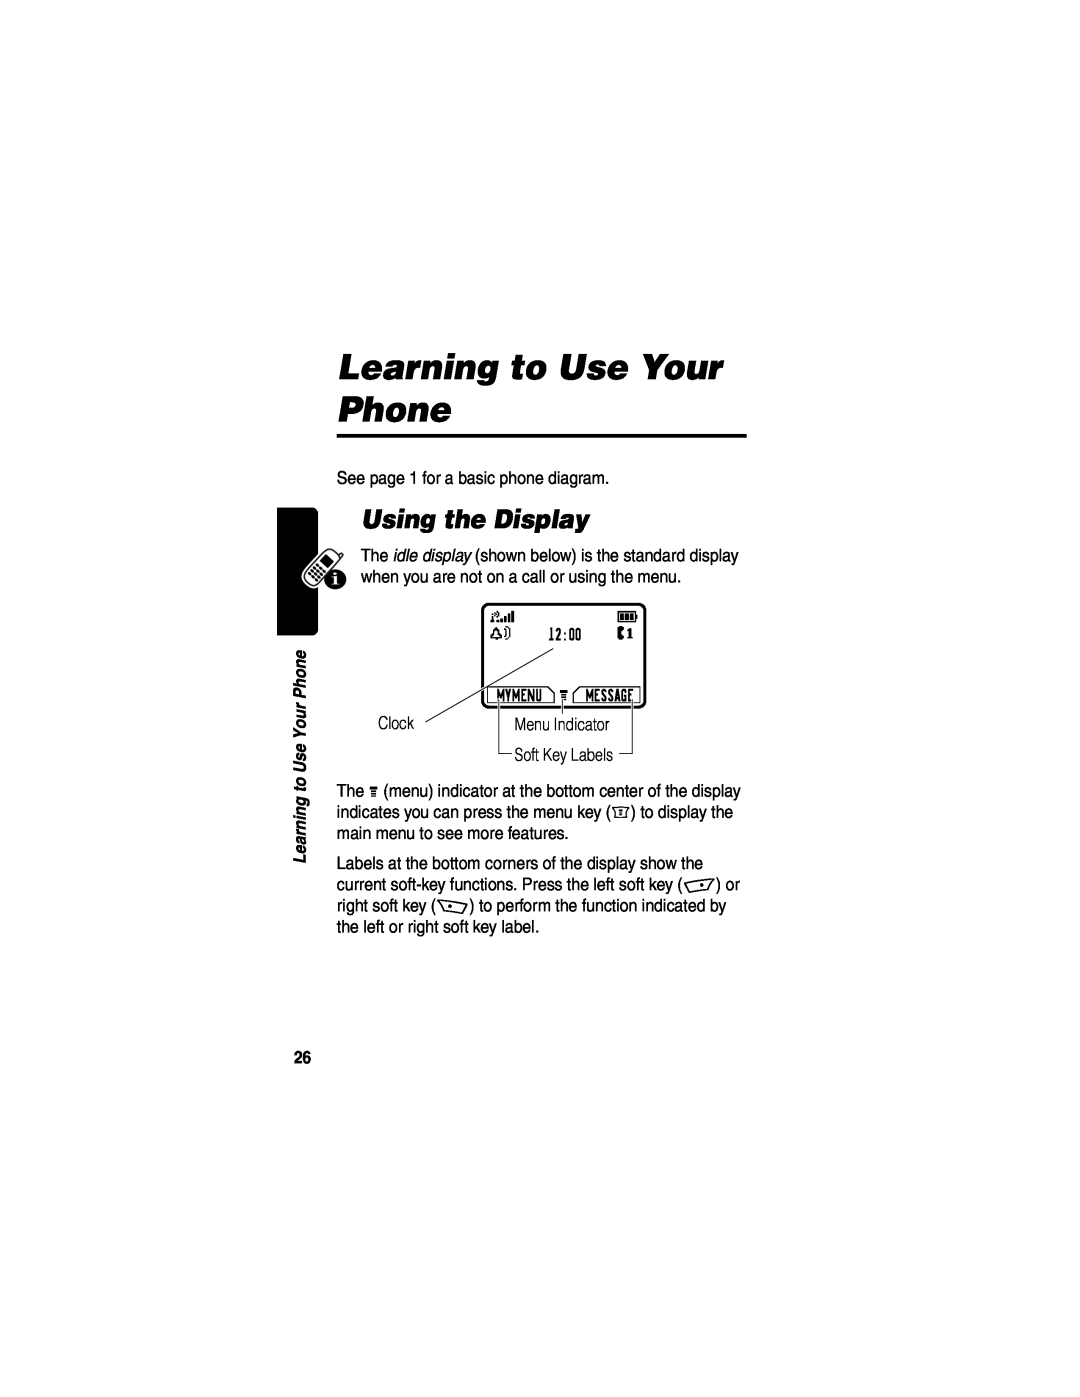 Motorola WIRELESS TELEPHONE manual Learning to Use Your Phone, Using the Display 